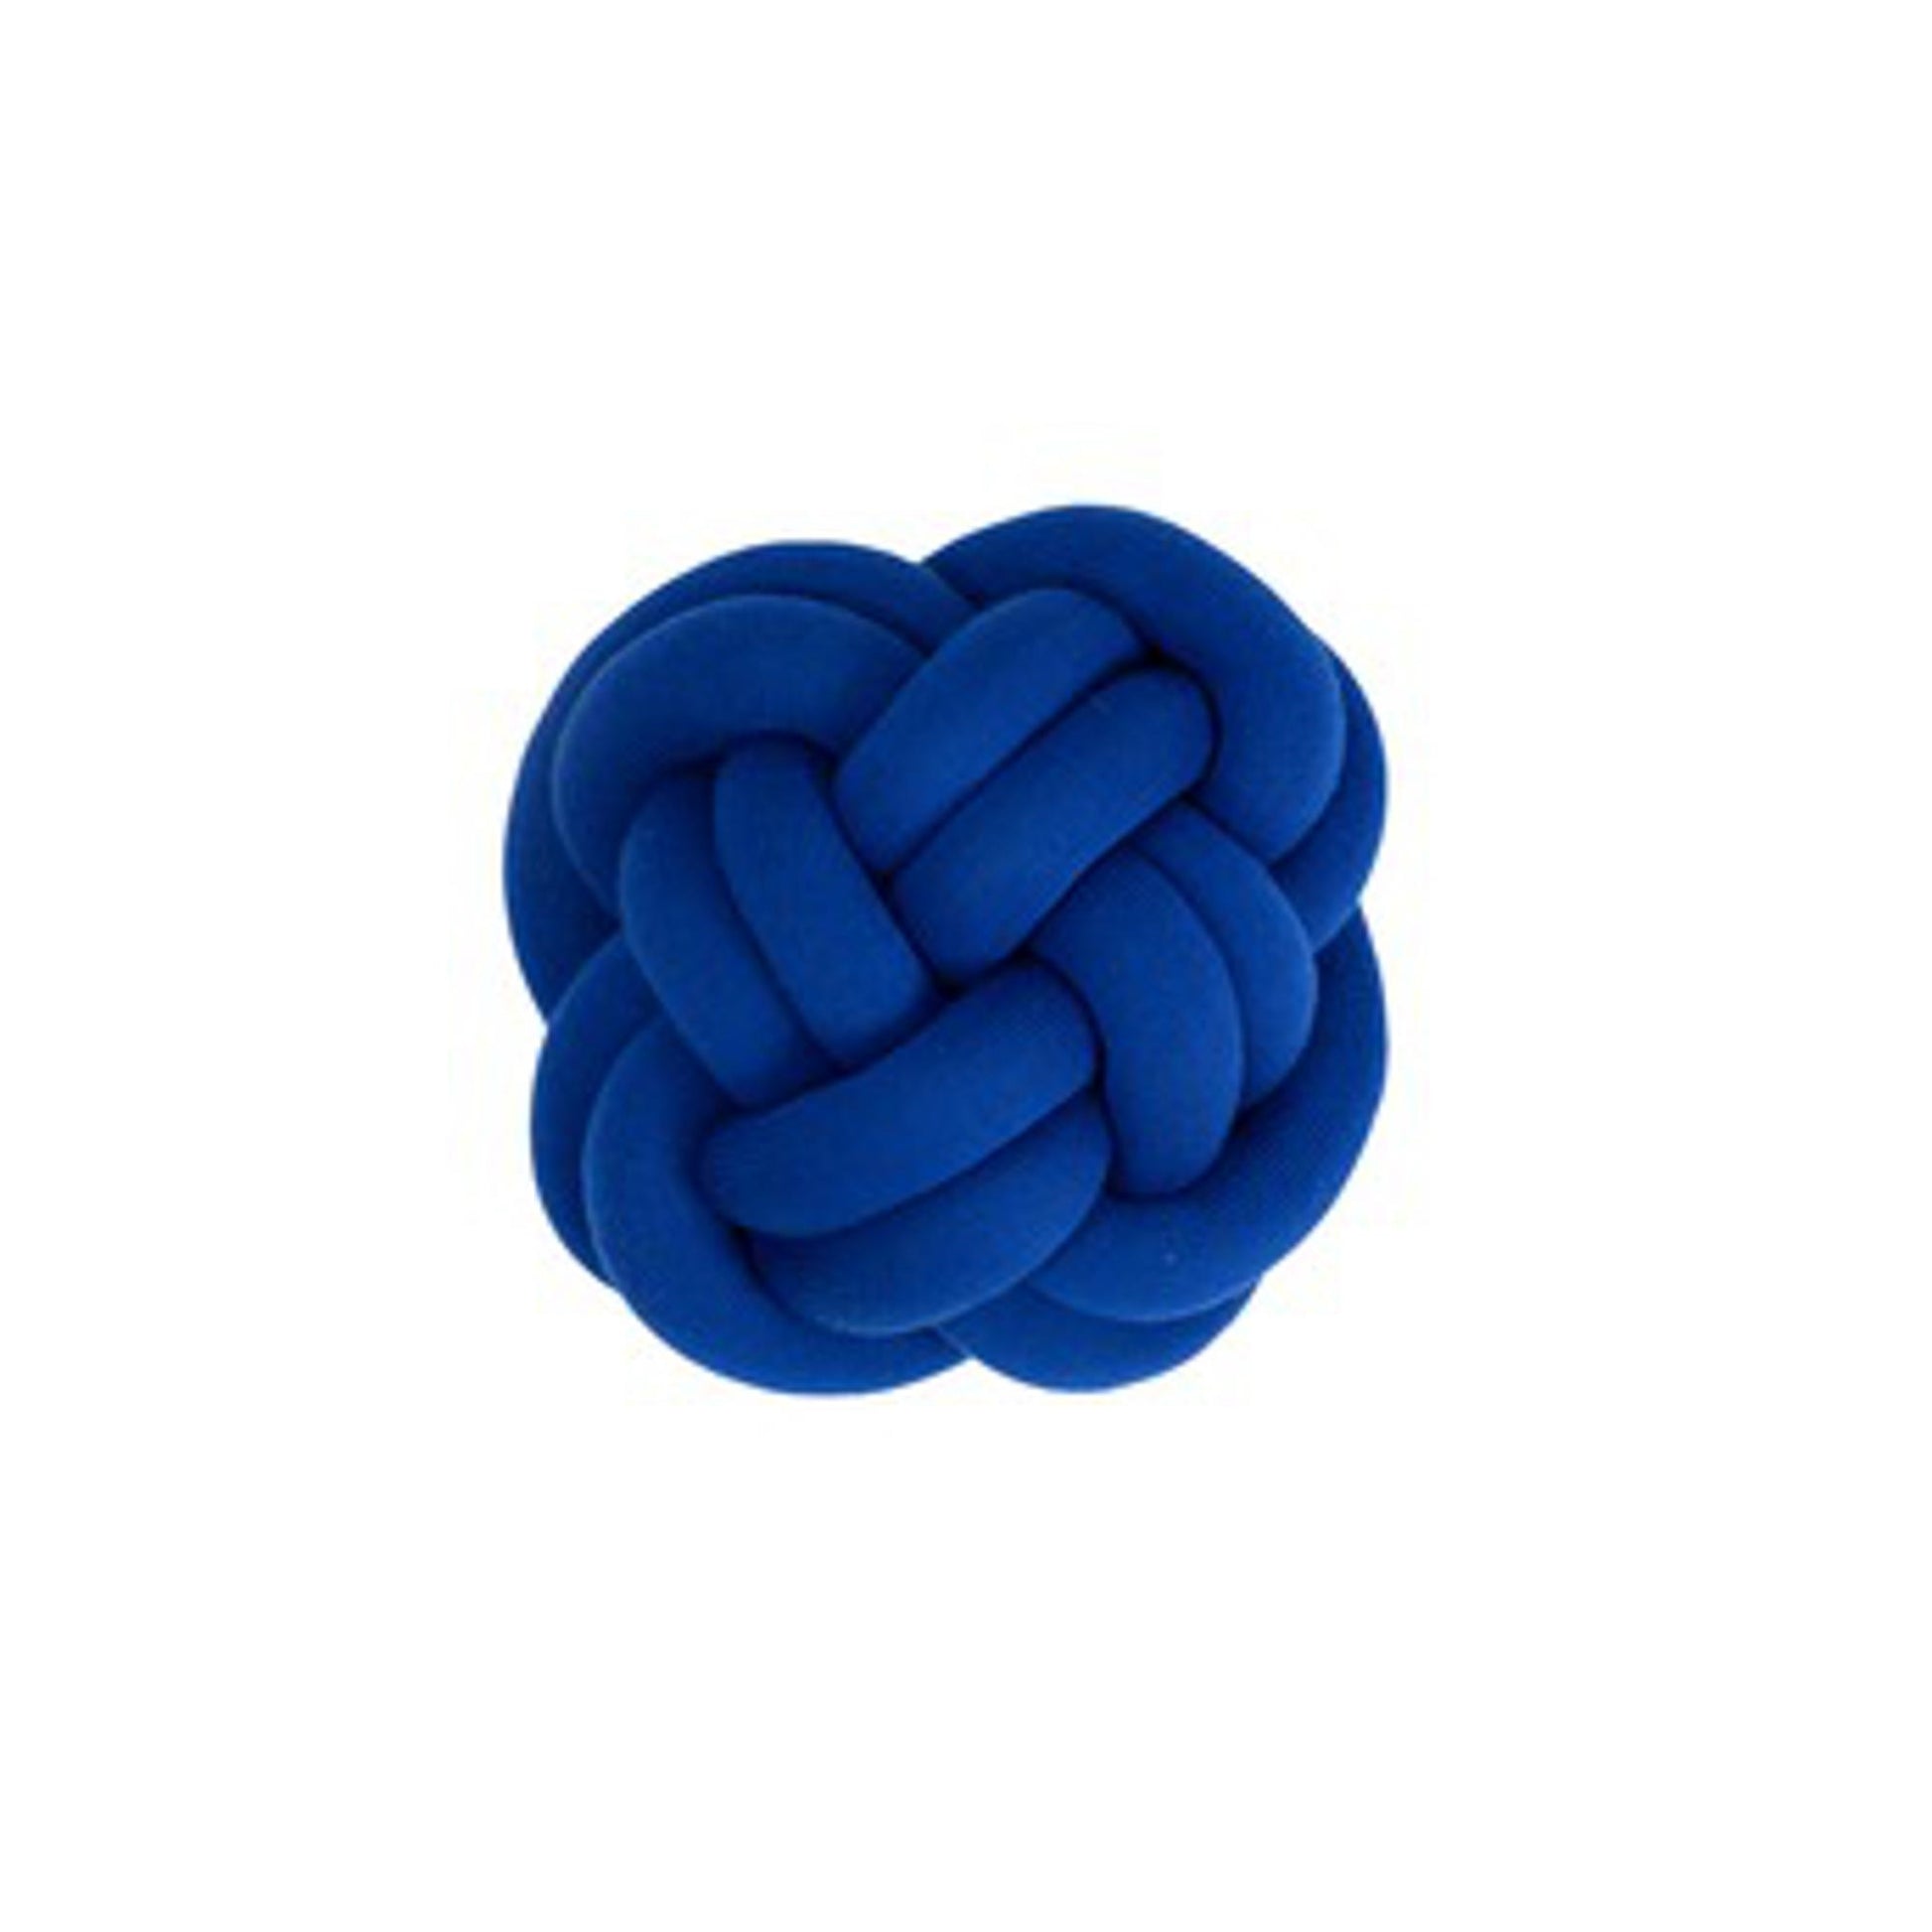 Knot Cushion by Design House Stockholm #Blue